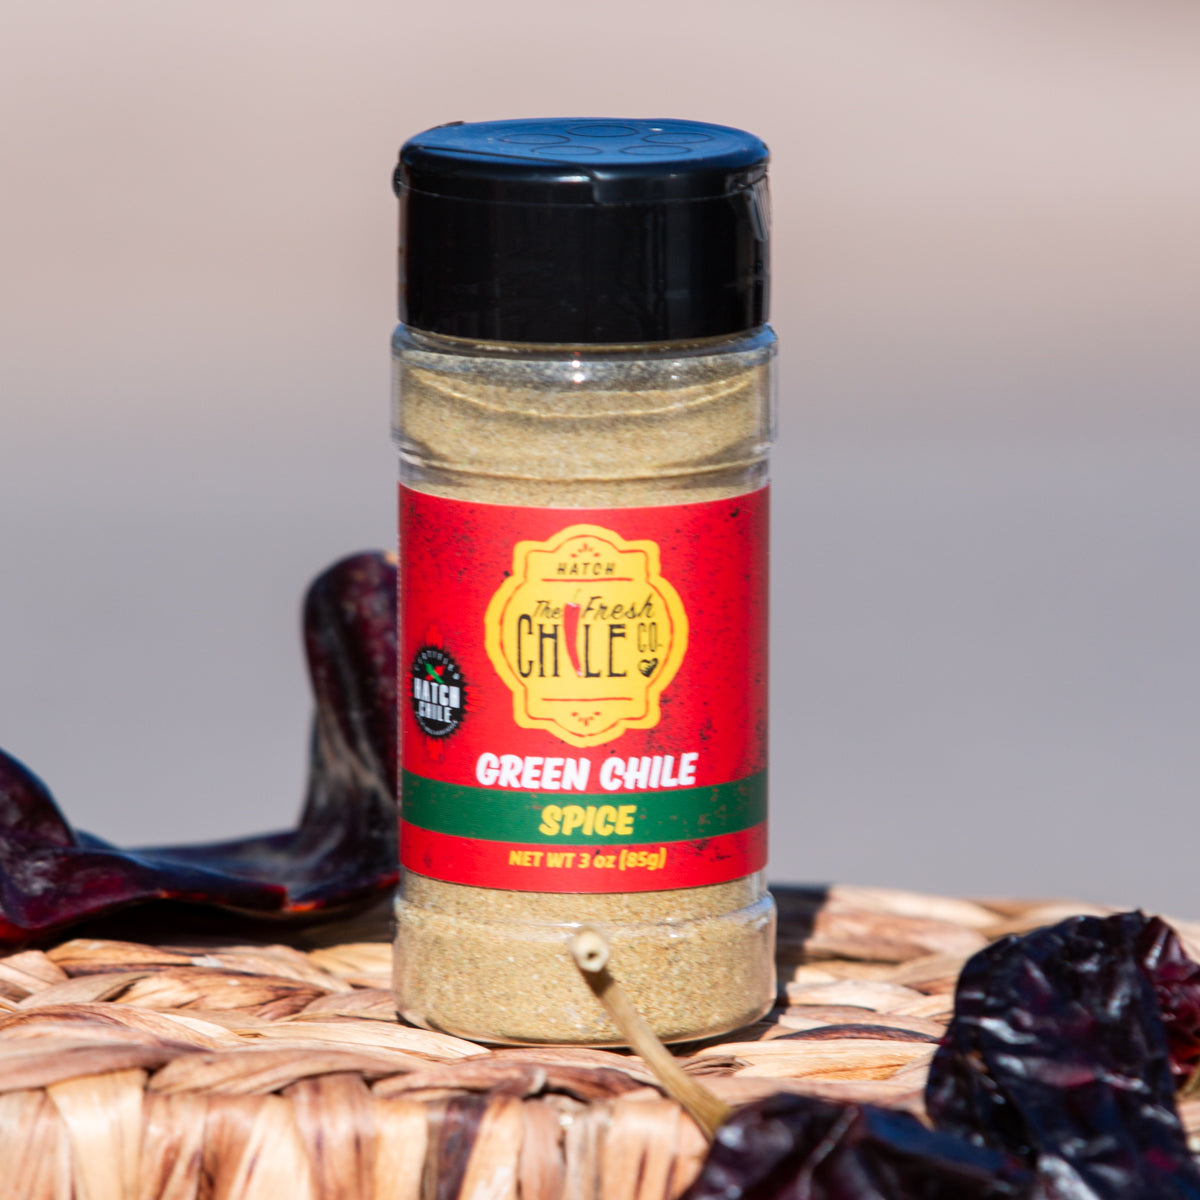 A bottle of Hatch Green Chile Spice placed on a wicker surface, flanked by dried red chilies. The label on the bottle displays vibrant red and yellow colors.